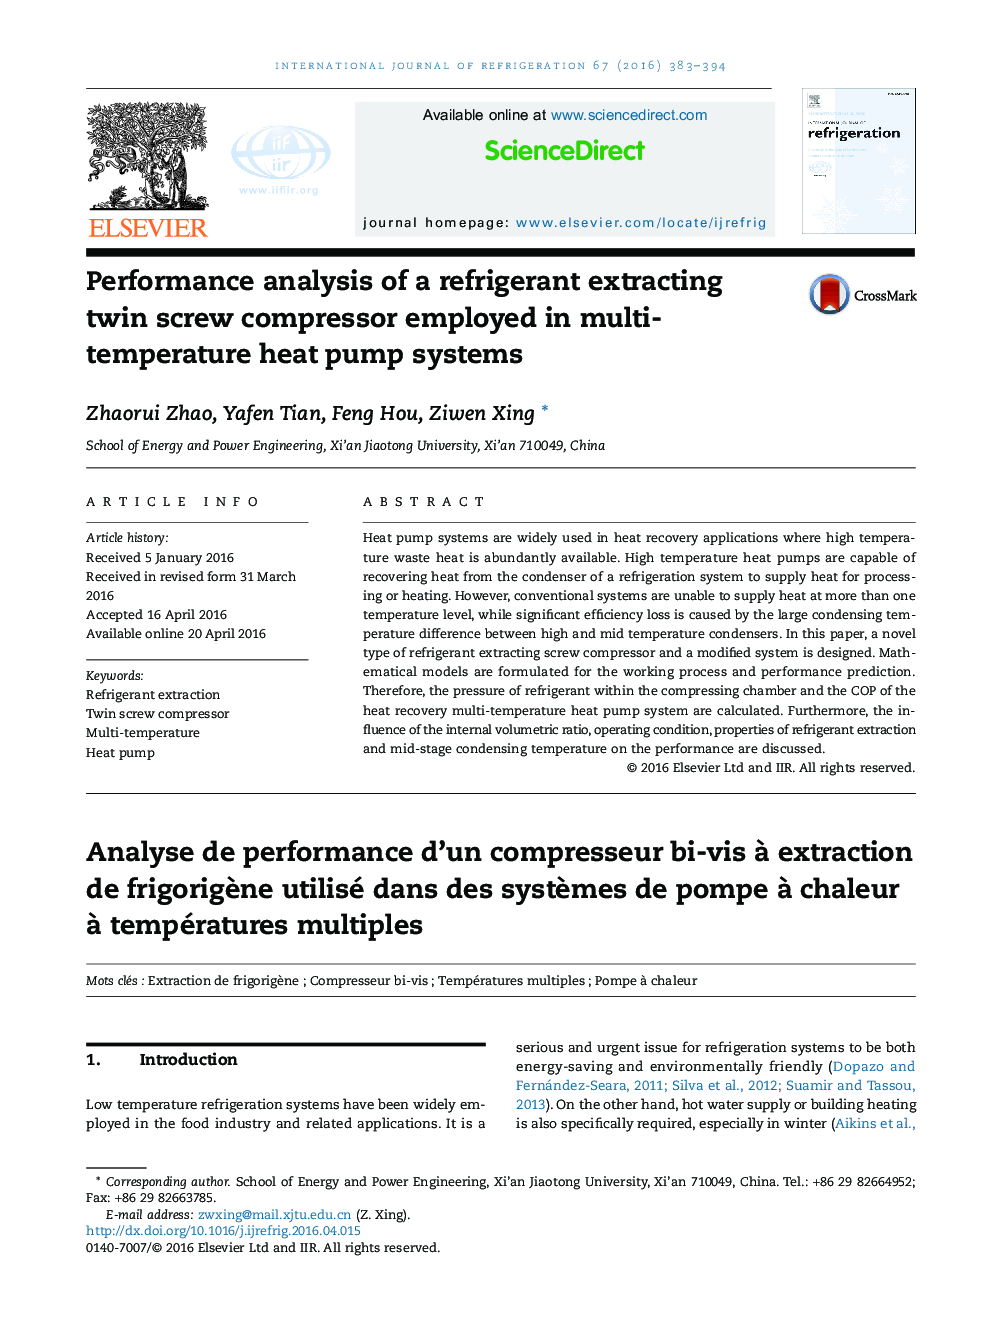 Performance analysis of a refrigerant extracting twin screw compressor employed in multi-temperature heat pump systems